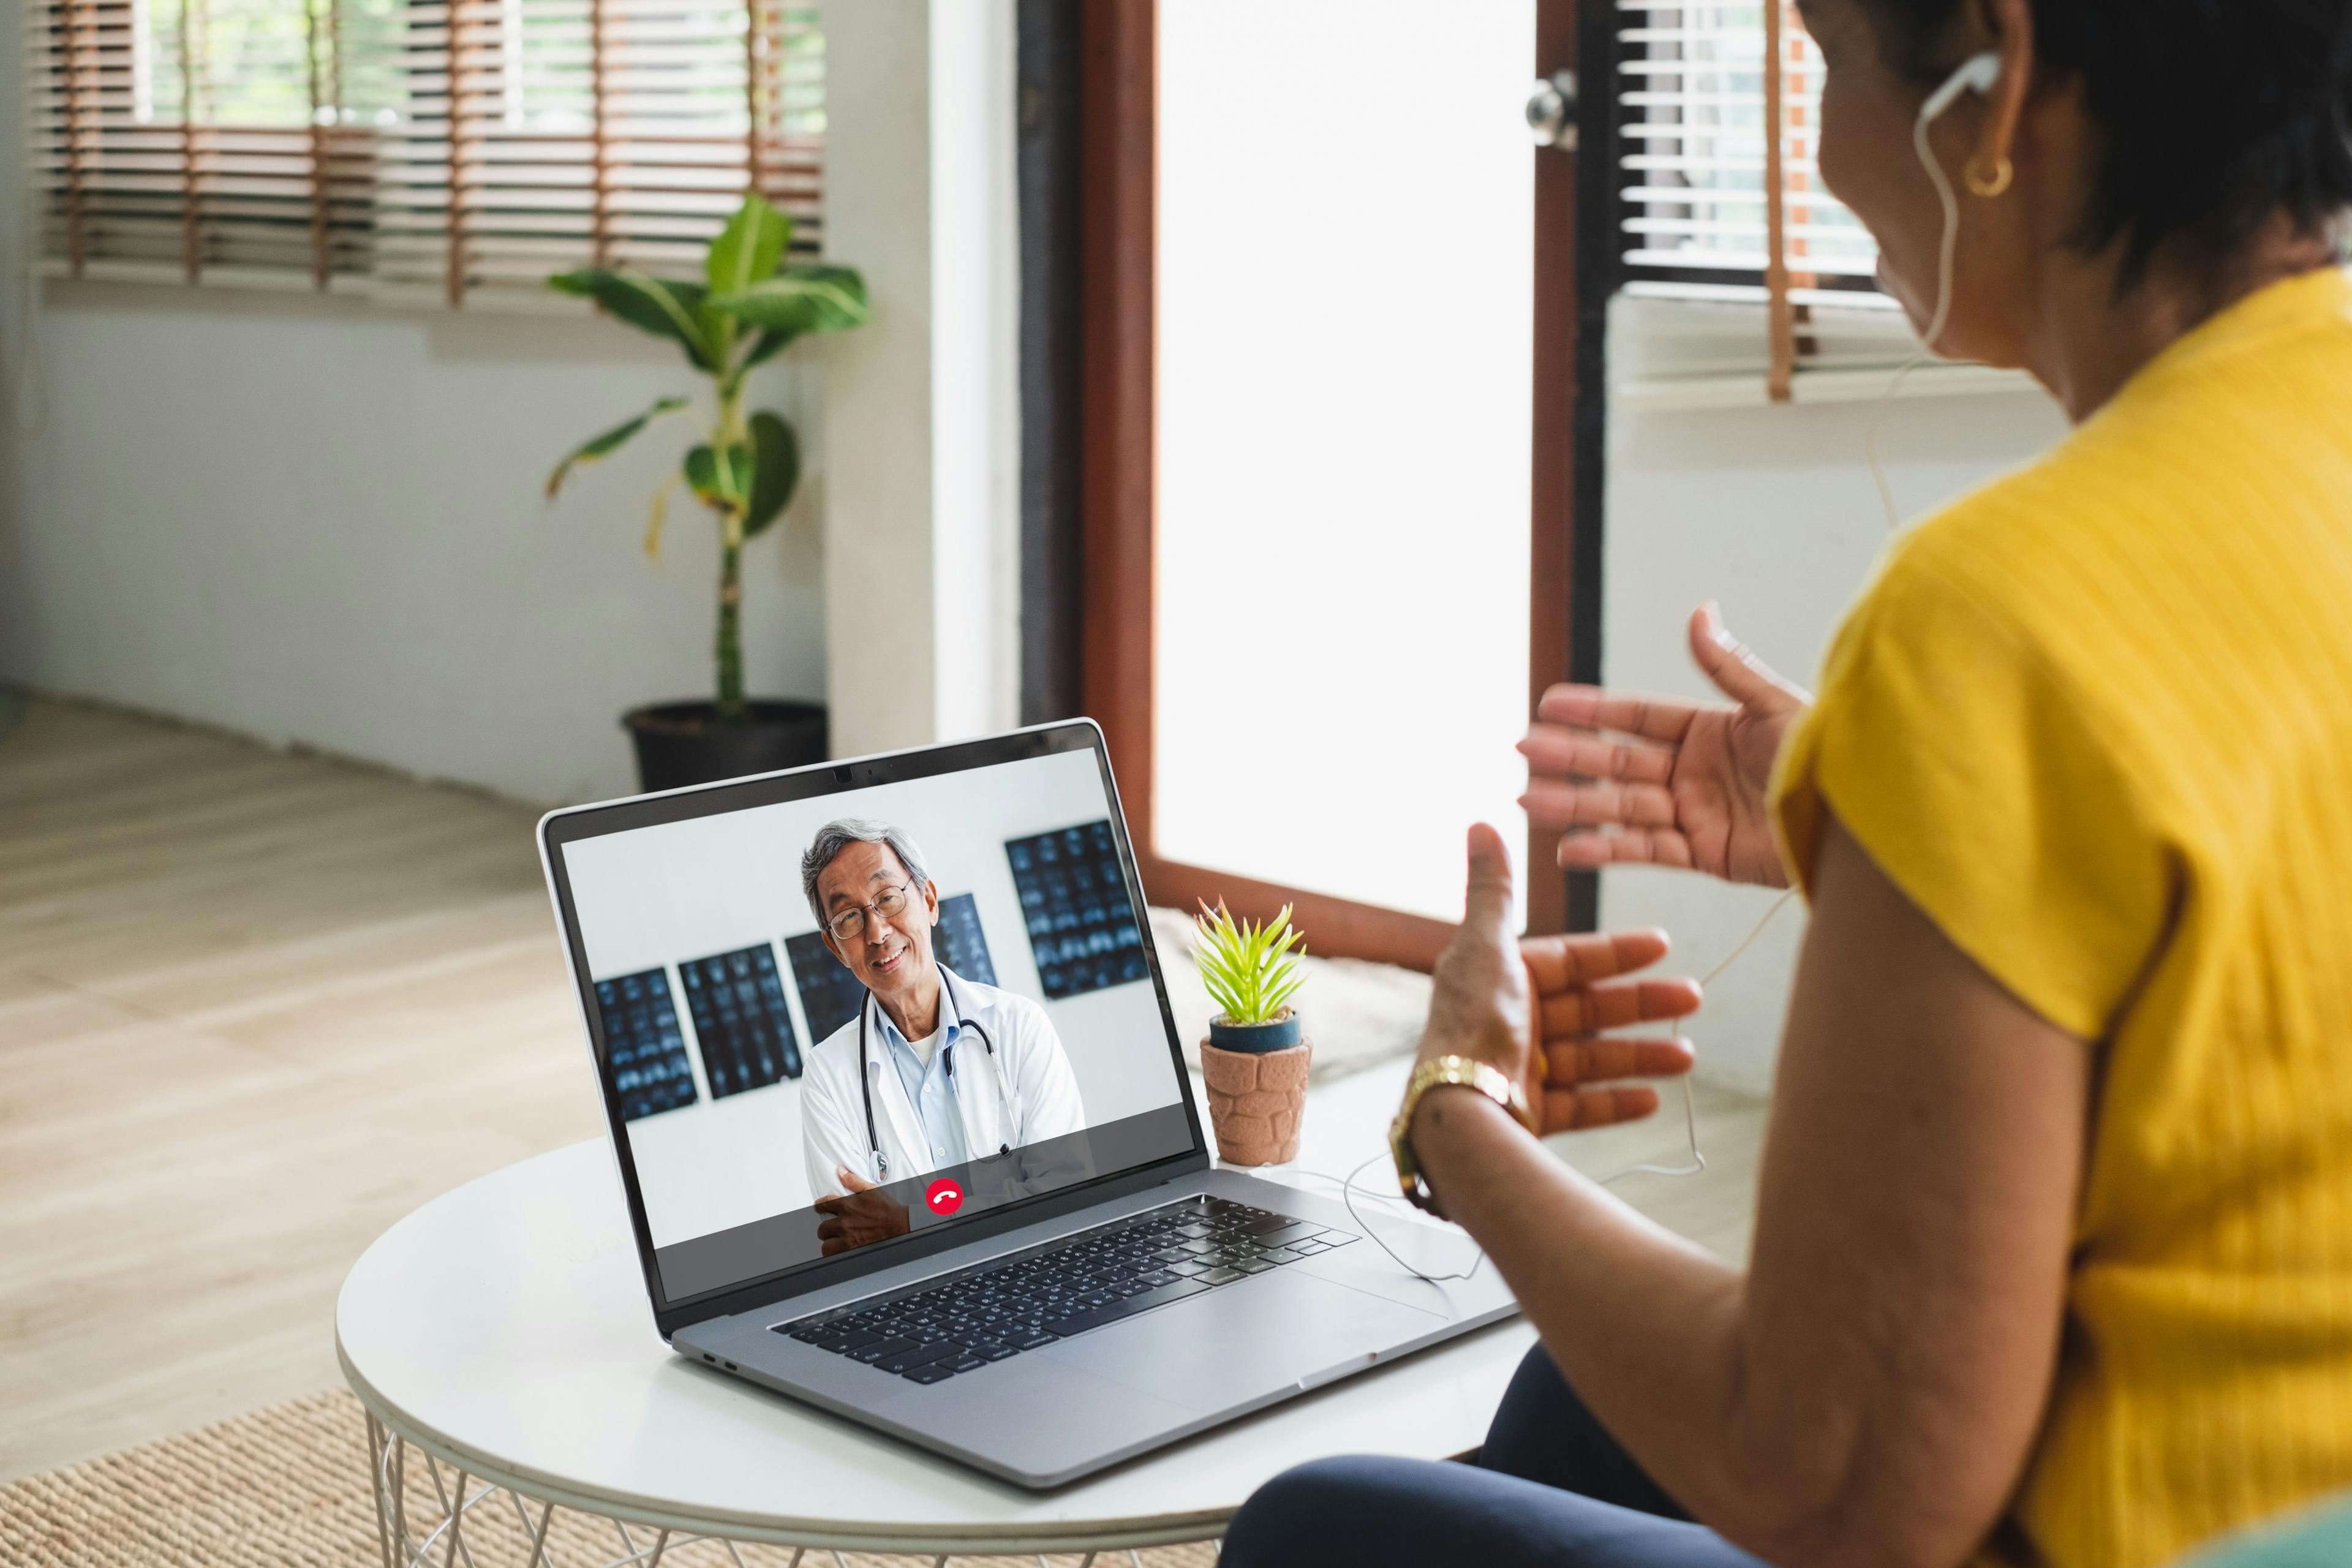 Telehealth Well Received With Satisfaction in Patients Living With HIV